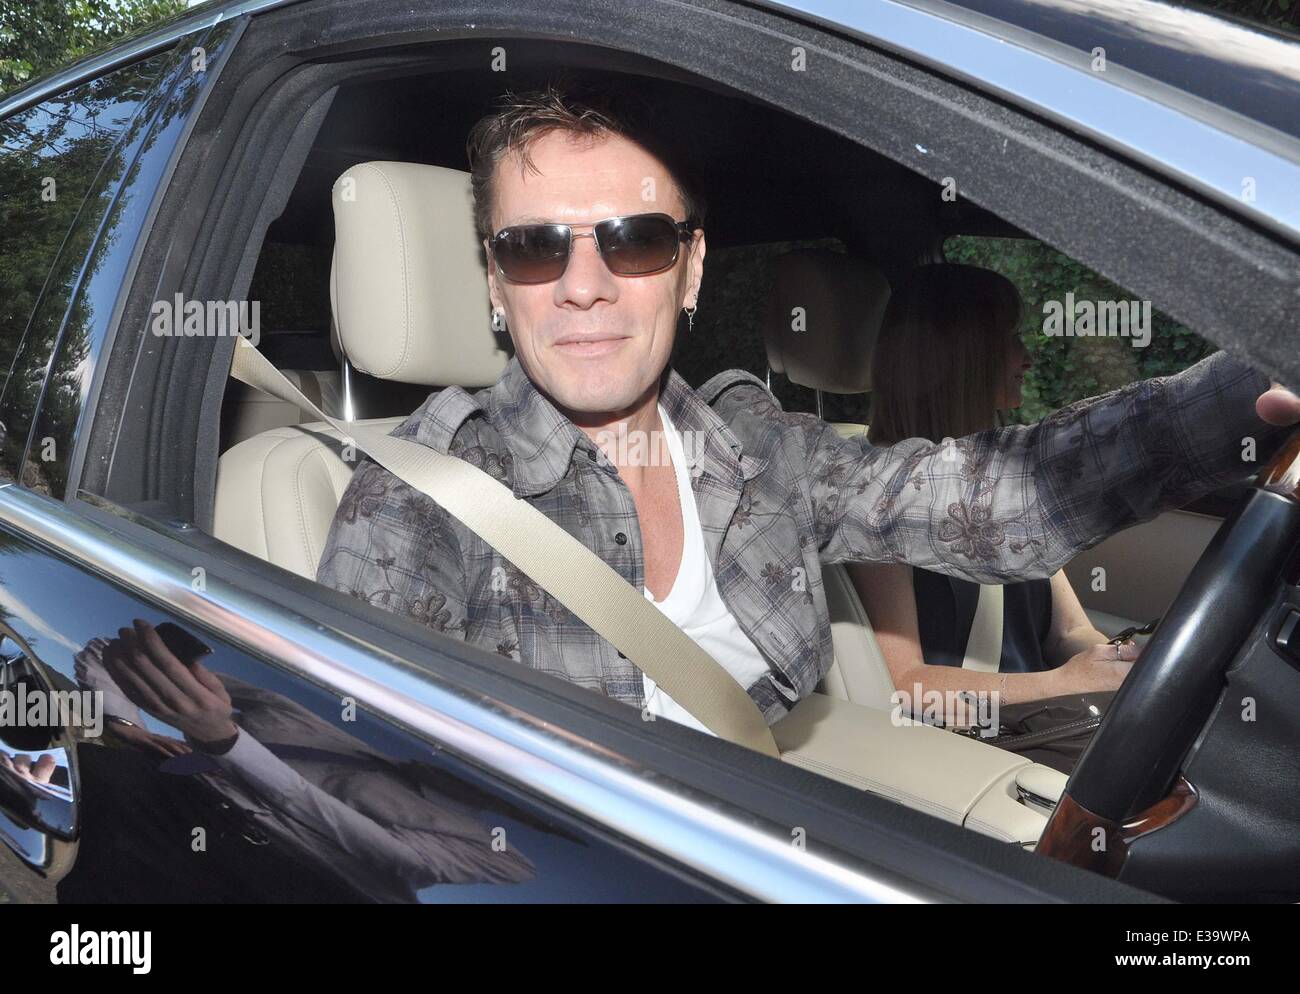 Guests including U2 manager Paul McGuinness, Drummer Larry Mullen and The Edge seen leaving the home of U2 Bassist Adam Clayton after a wedding reception lunch at the house. Noticeable absence was Bono, but his wife Ali Hewson attended, Adam Clayton later Stock Photo